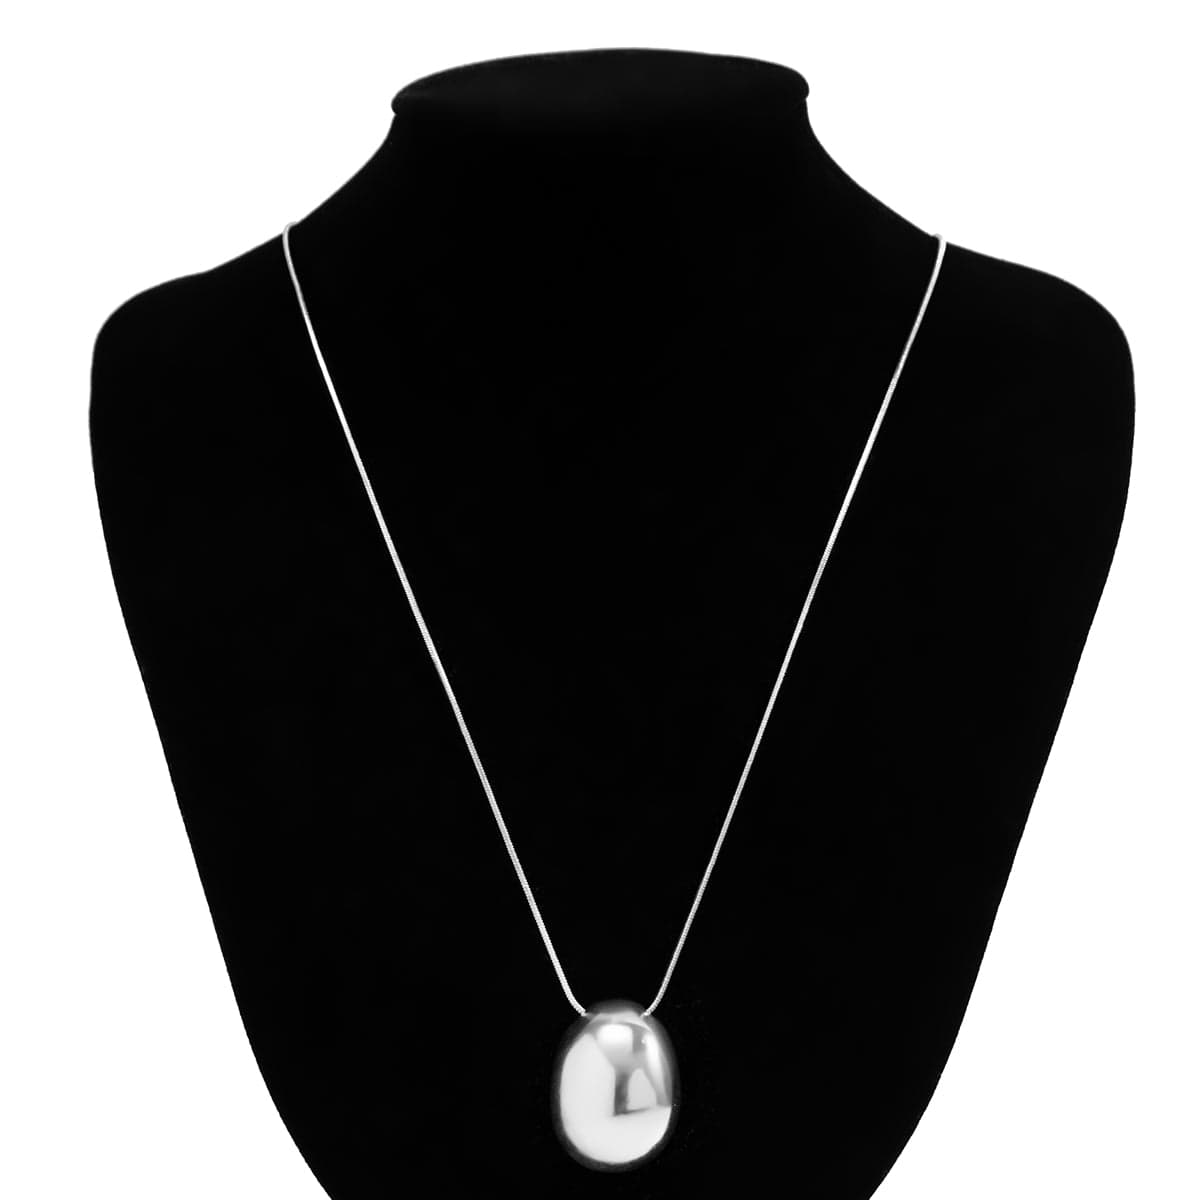 Chic Gold Silver Plated Oval Pendant Necklace - ArtGalleryZen